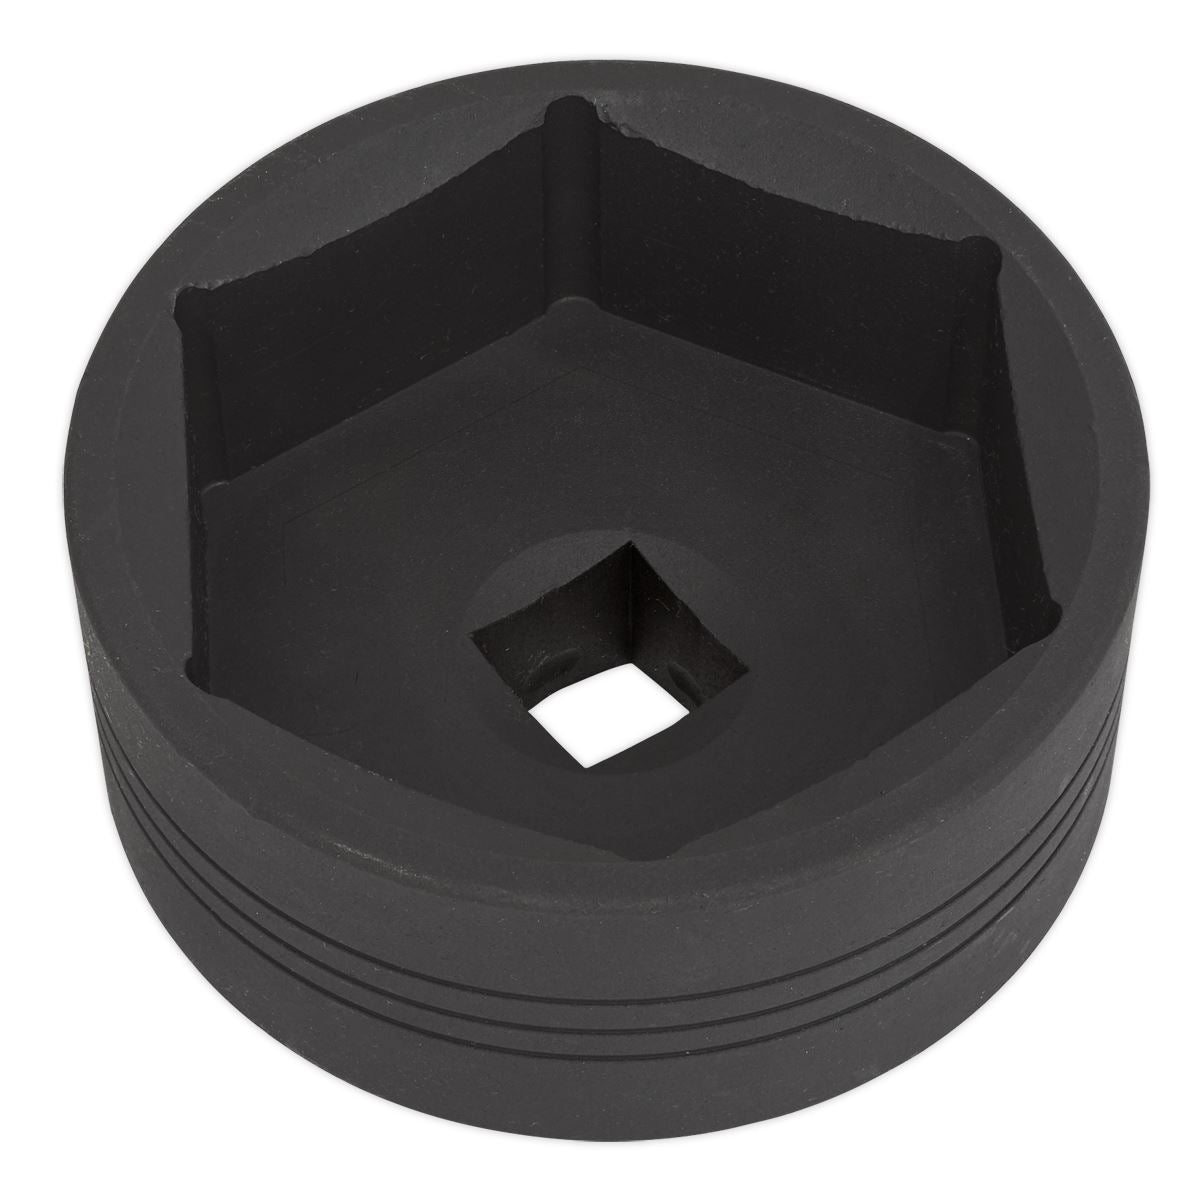 Sealey Impact Socket 100mm 1"Sq Drive Commercial